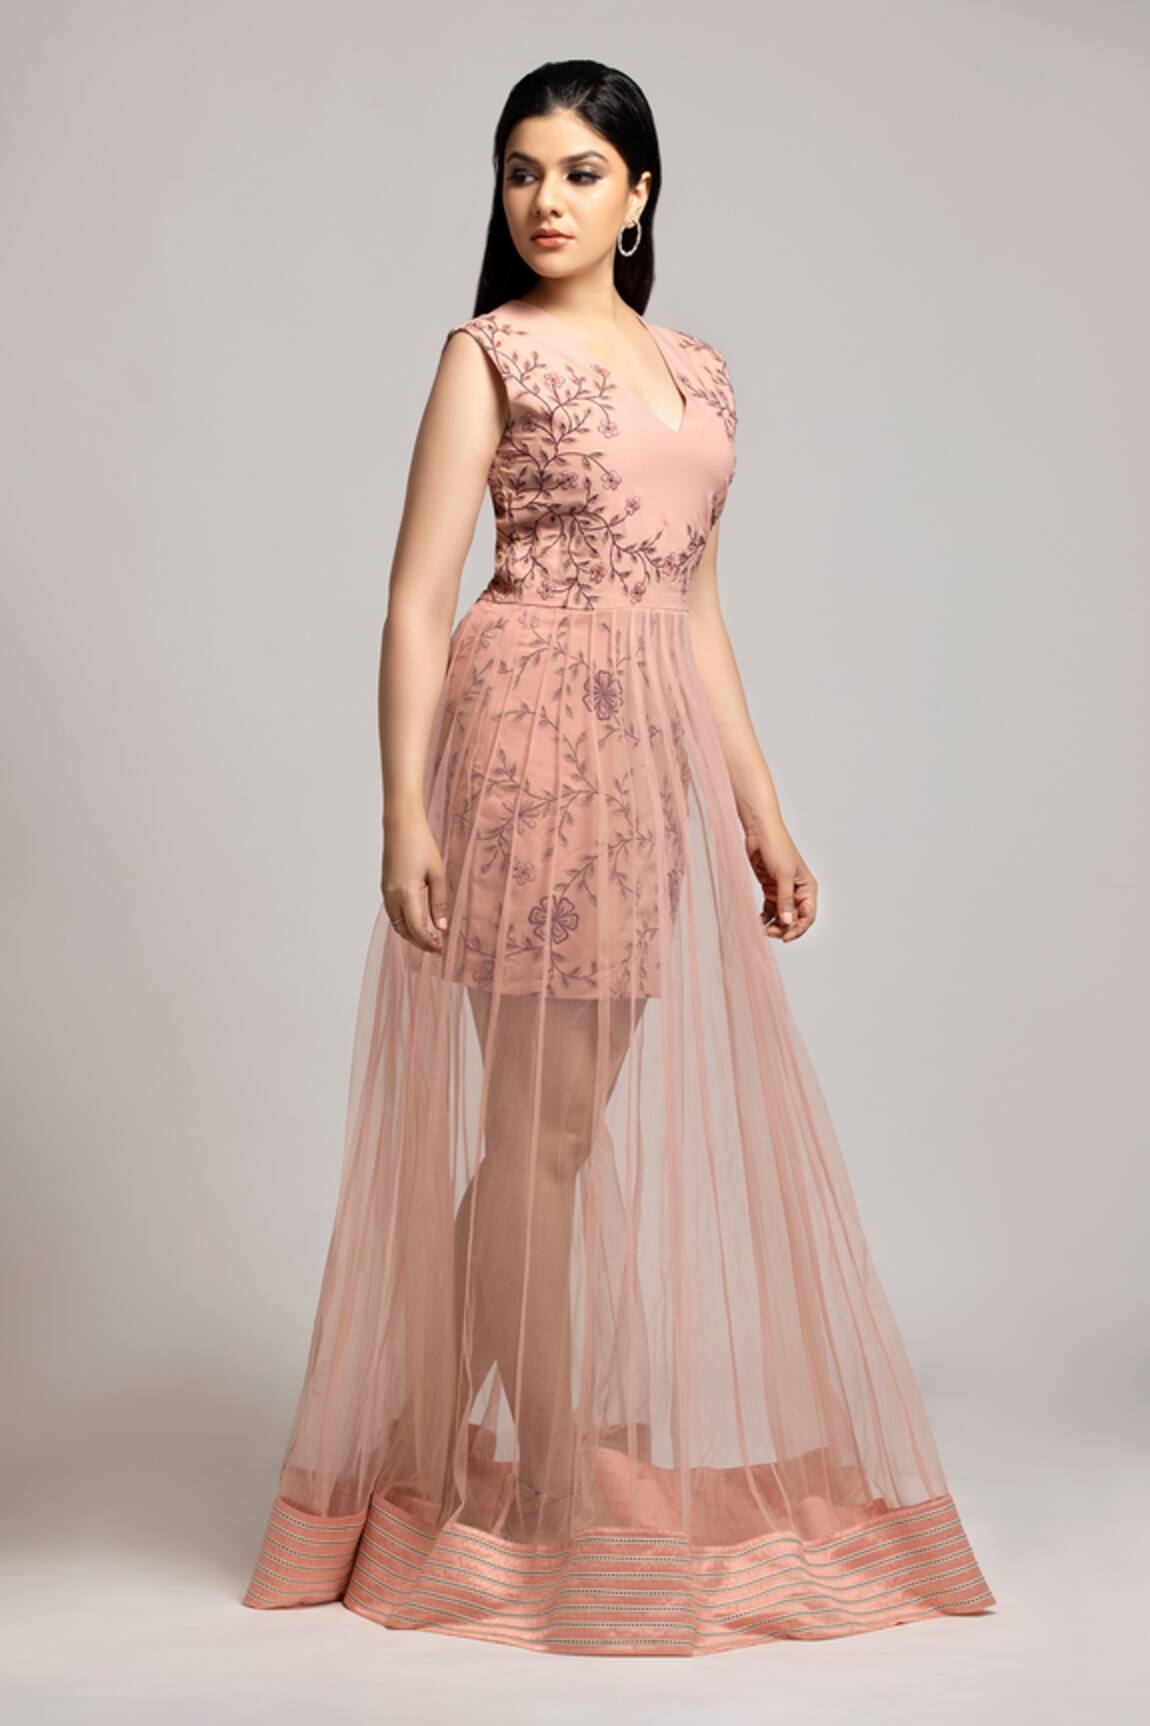 Glamorous  New Flowy Net Gowns For This Party Season  YouTube